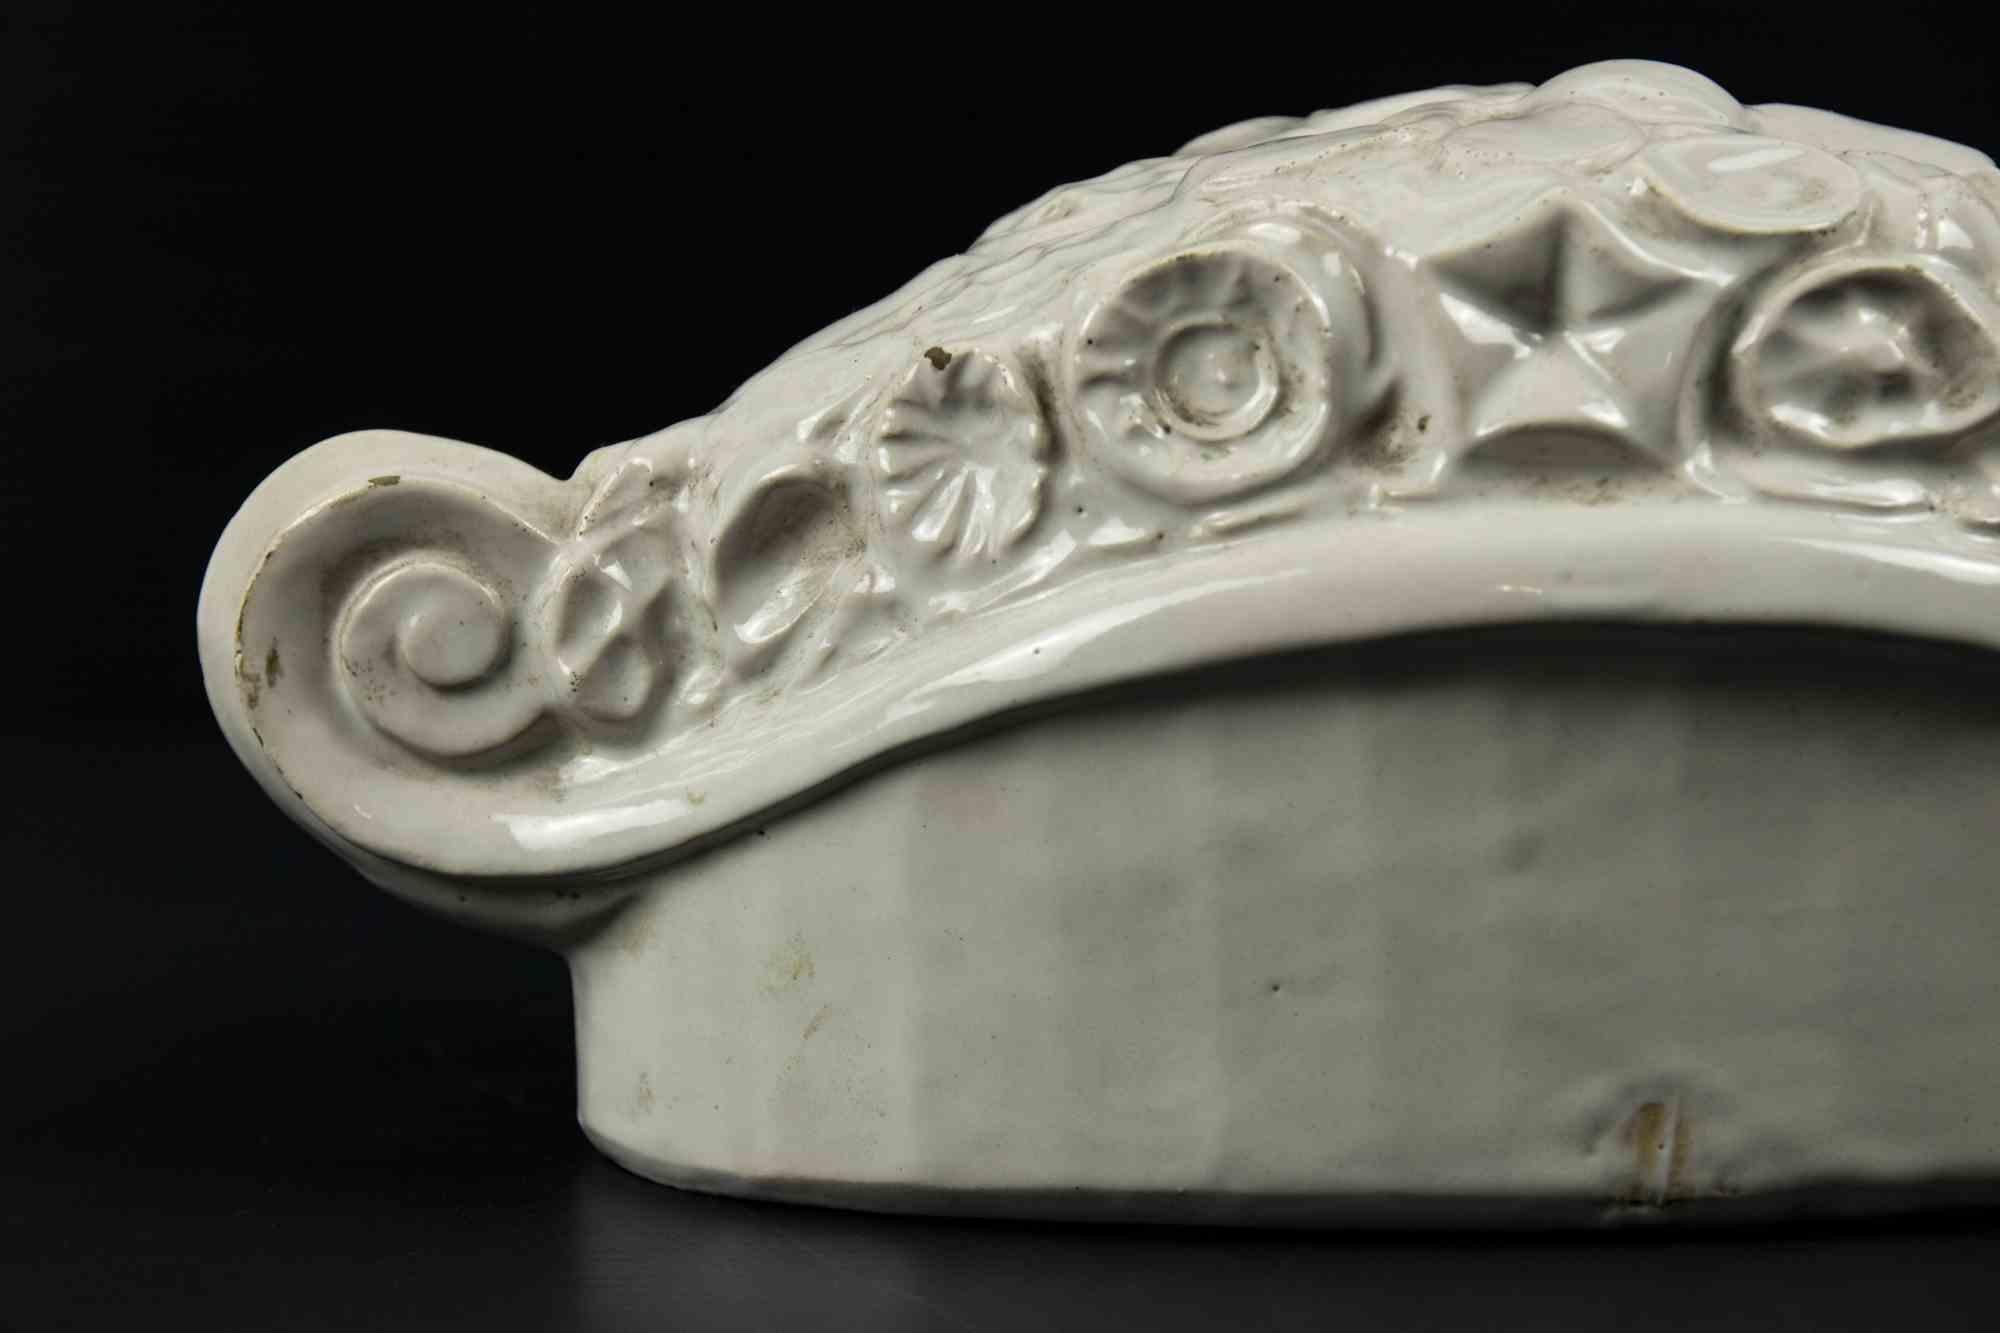 Vintage ceramic centerpiece is an original modern object realized in the mid-20th century.

Original white ceramics.

Made in Italy.

Beautiful object realized in Italy with white ceramics with swirls on the left and on the right side. In the